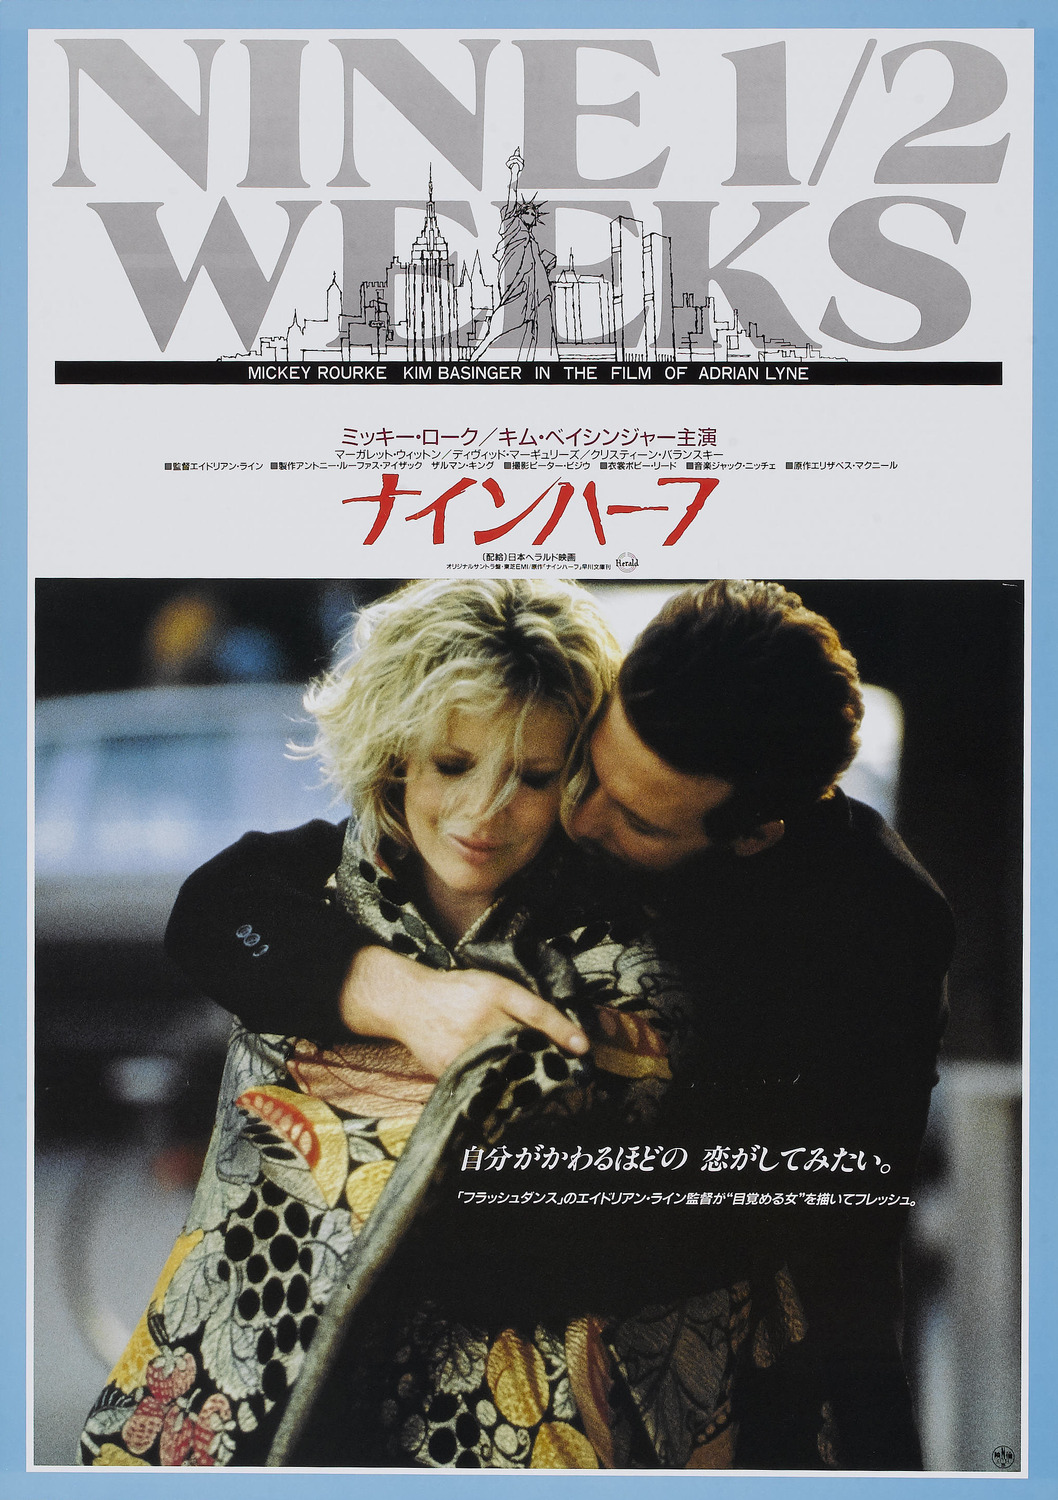 Extra Large Movie Poster Image for Nine 1/2 Weeks (#4 of 5)